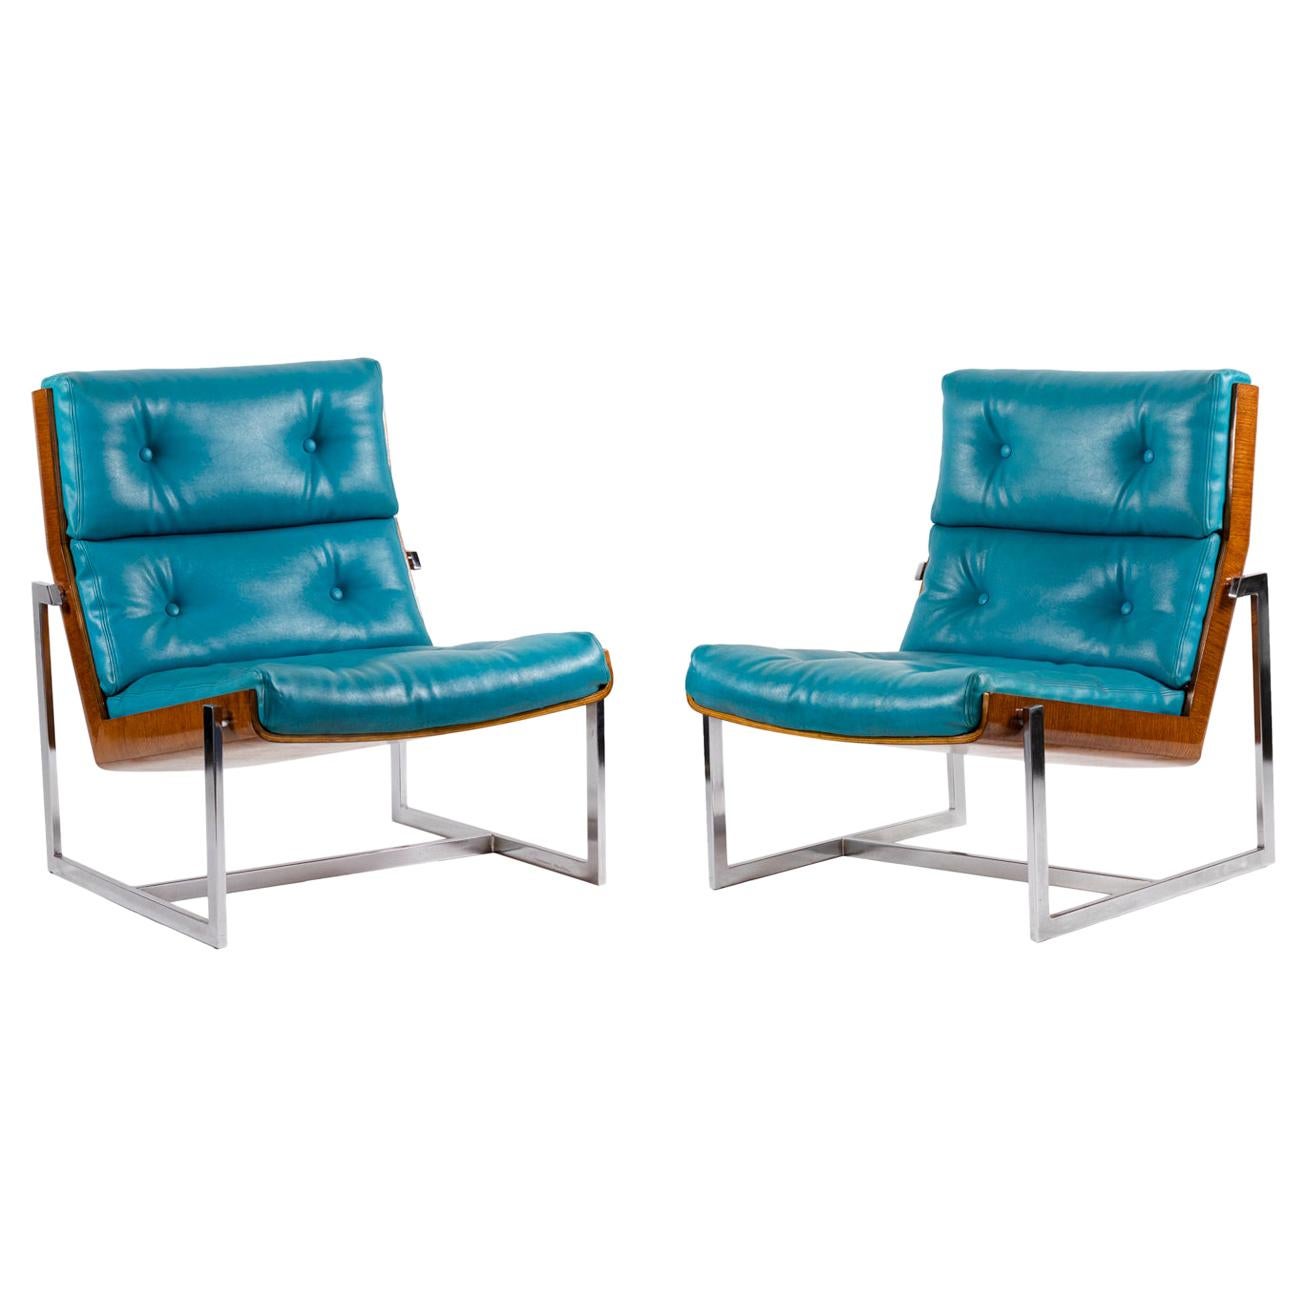 William Plunkett, Pair of Armchairs in Blue Leather and Plywood, 1970s